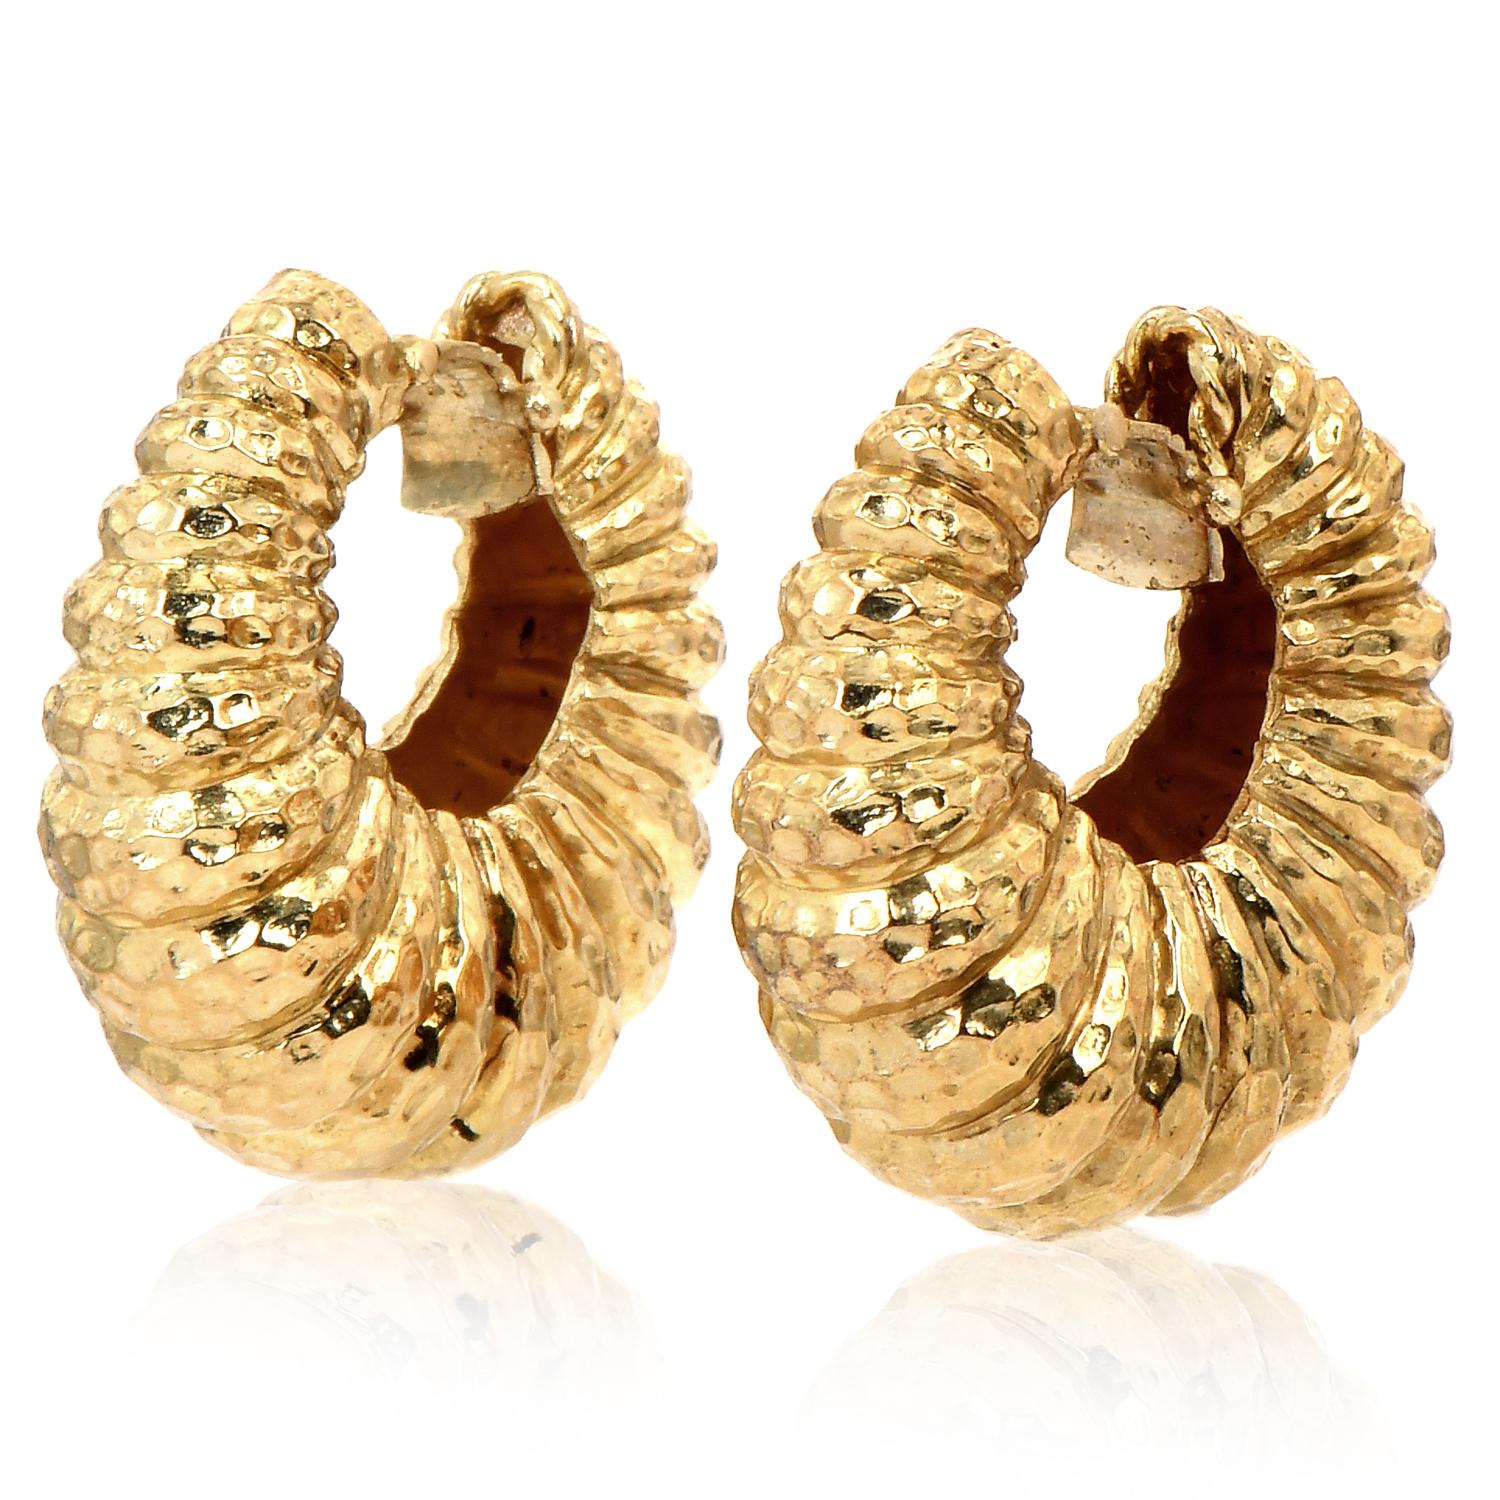 This is a timeless piece, very desirable. they can be worn on any occasion or enjoy them every day.  They are very elegant and sophisticated earrings. it is hand hammered and it shines as it dangles. 
These exquisite Vintage large hoop Earrings are